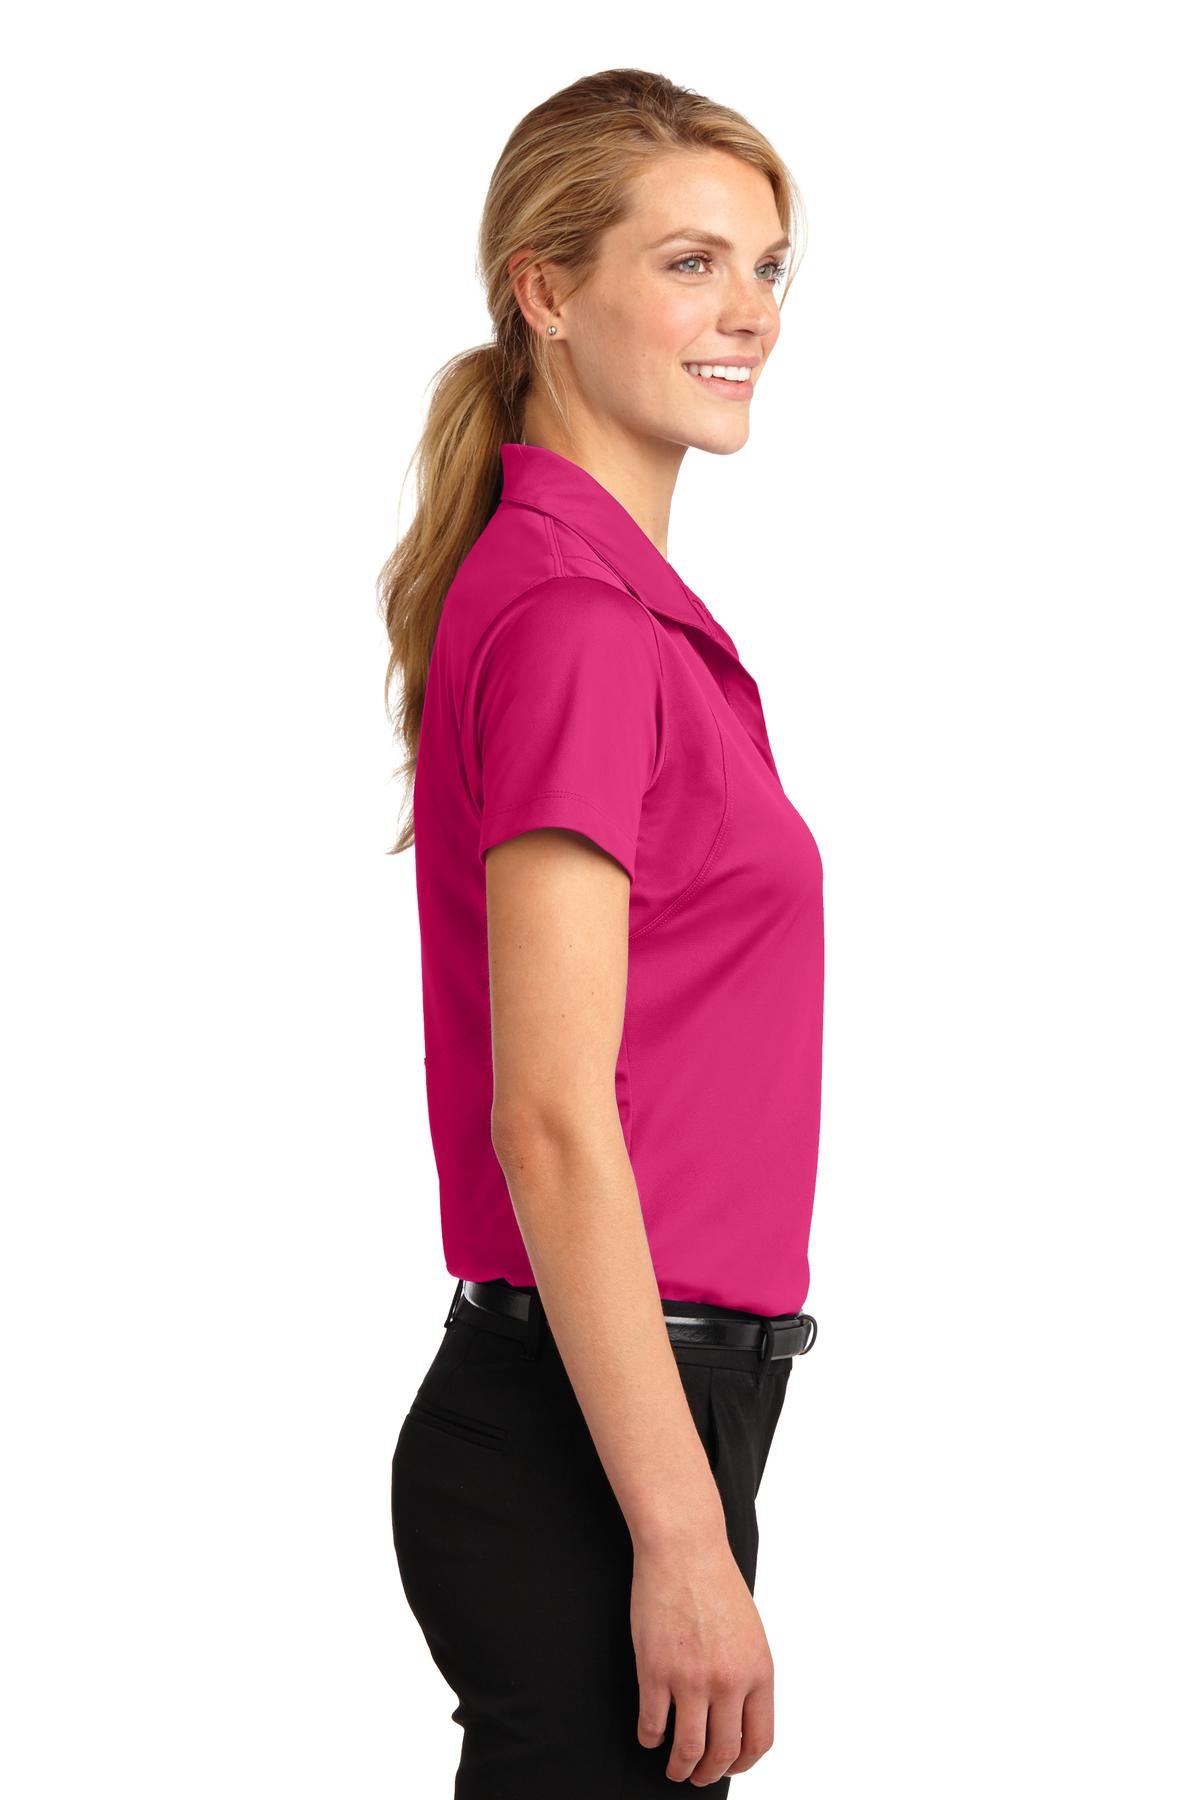 Swaasi Core - Sport-Tek® LADIES Micropique Sport-Wick® Polo Extra Color with EMB Logo